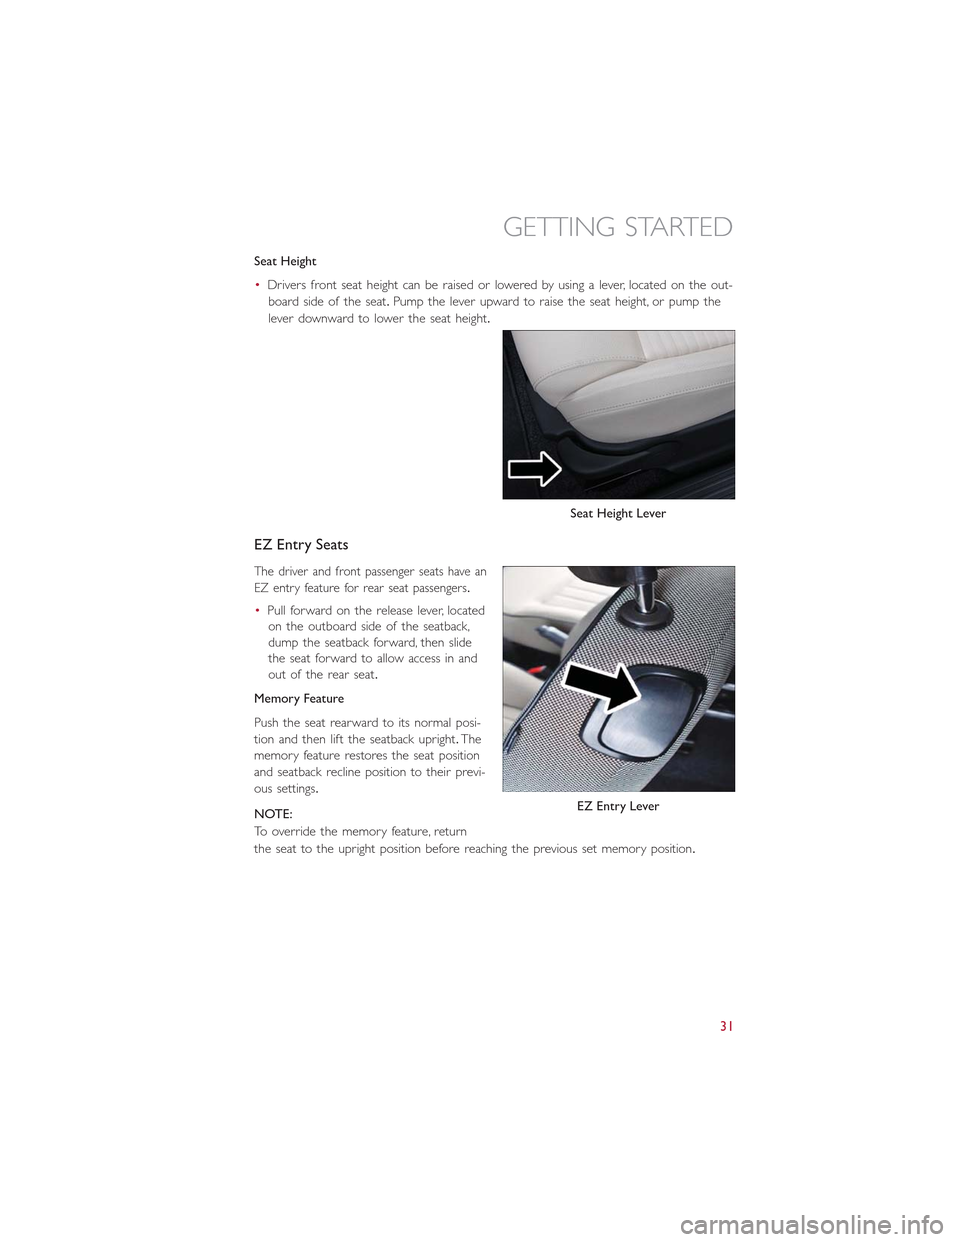 FIAT 500E 2015 2.G User Guide Seat Height
•Drivers front seat height can be raised or lowered by using a lever, located on the out-
board side of the seat.Pump the lever upward to raise the seat height, or pump the
lever downwar